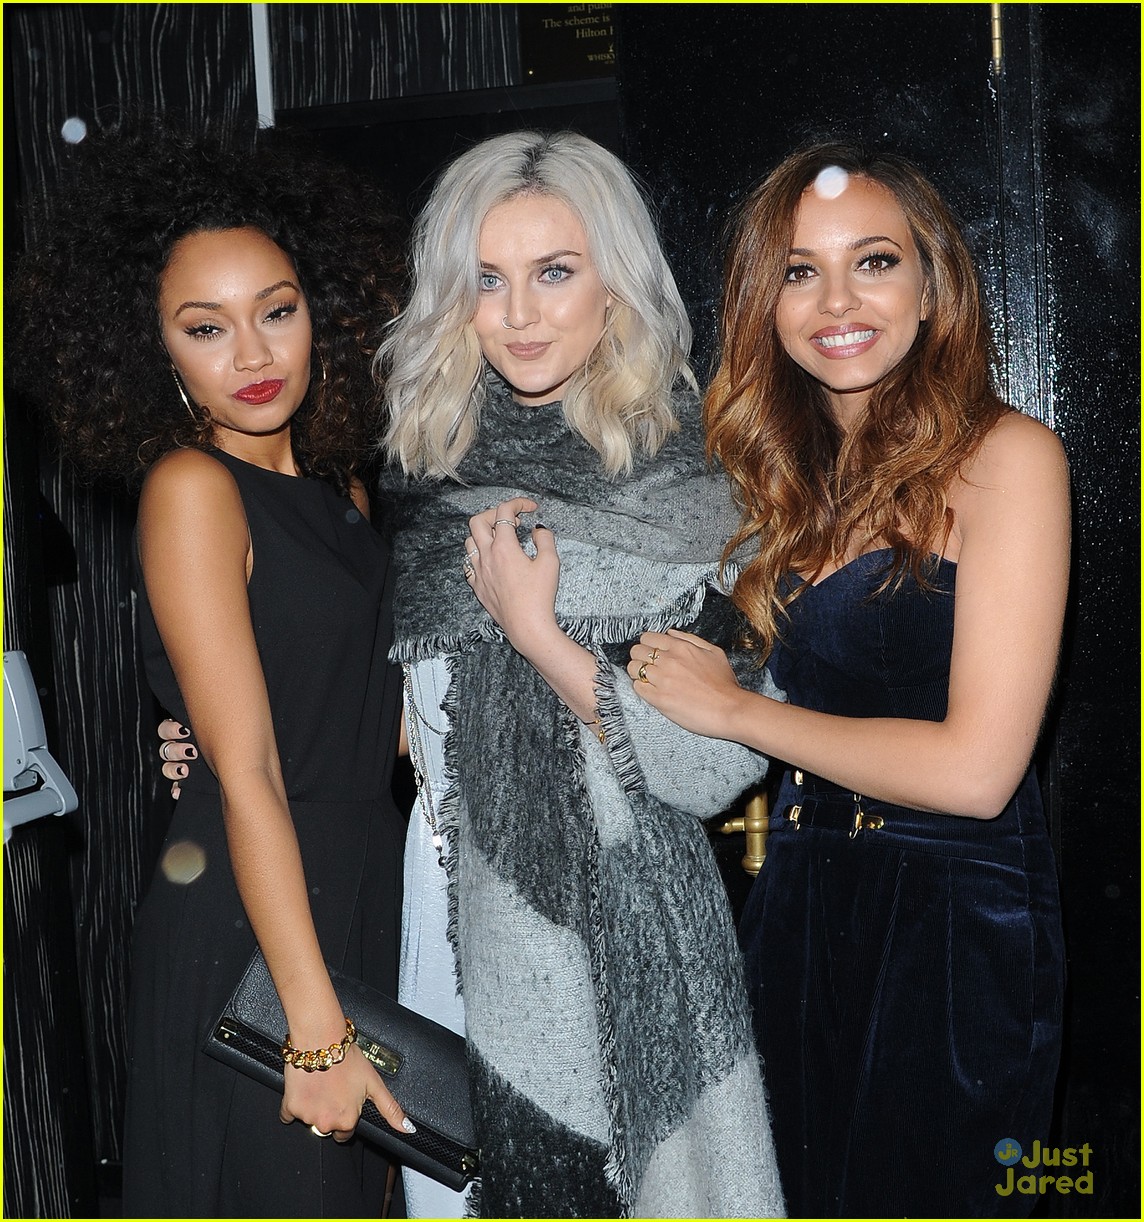 little mix celebrate after x factor performance 06